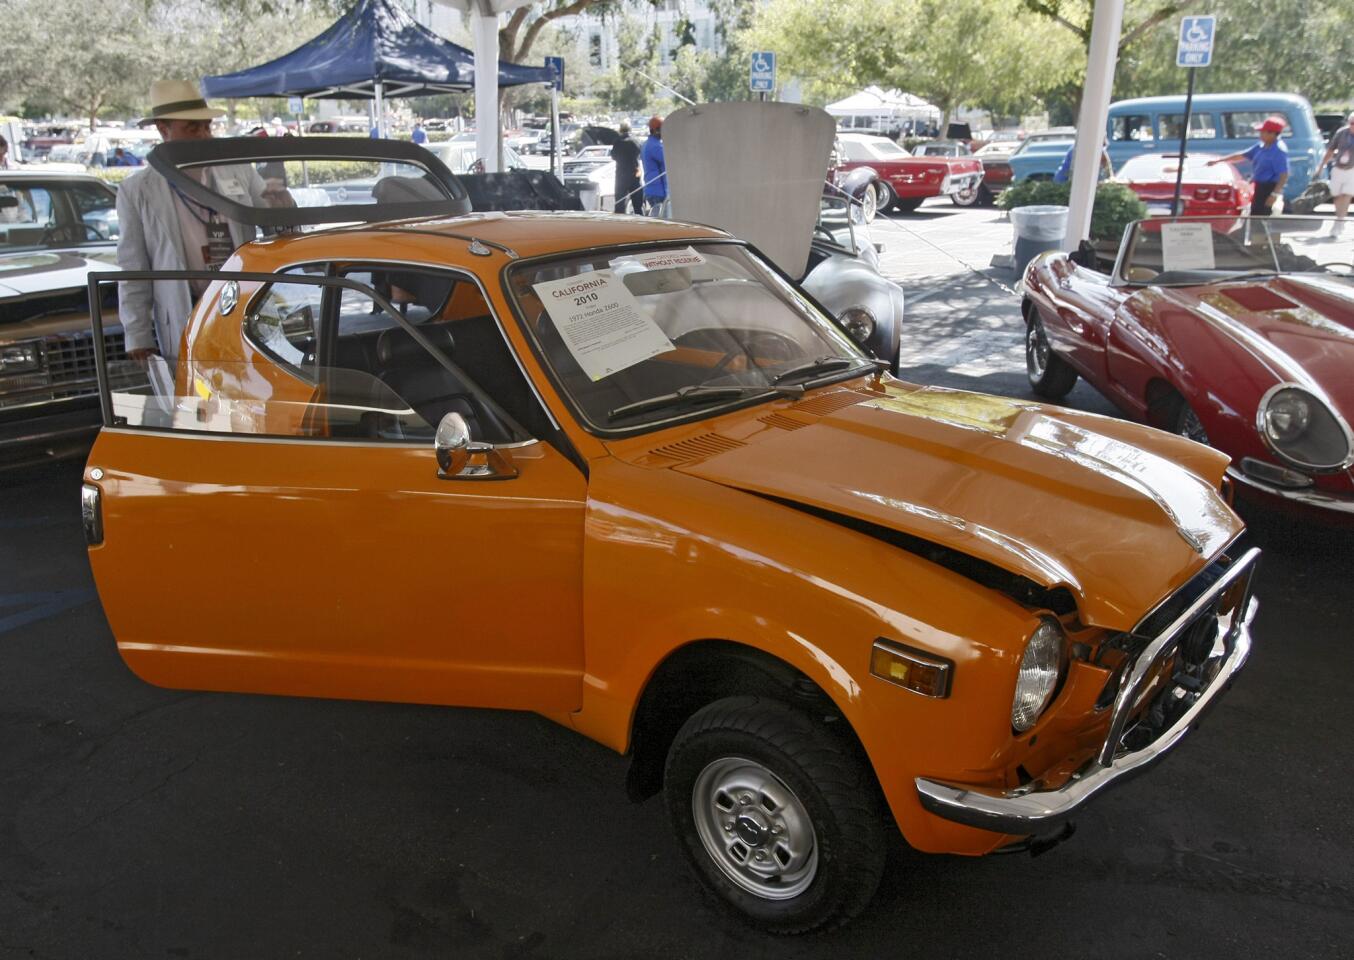 Photo Gallery: Classic cars auction in Burbank